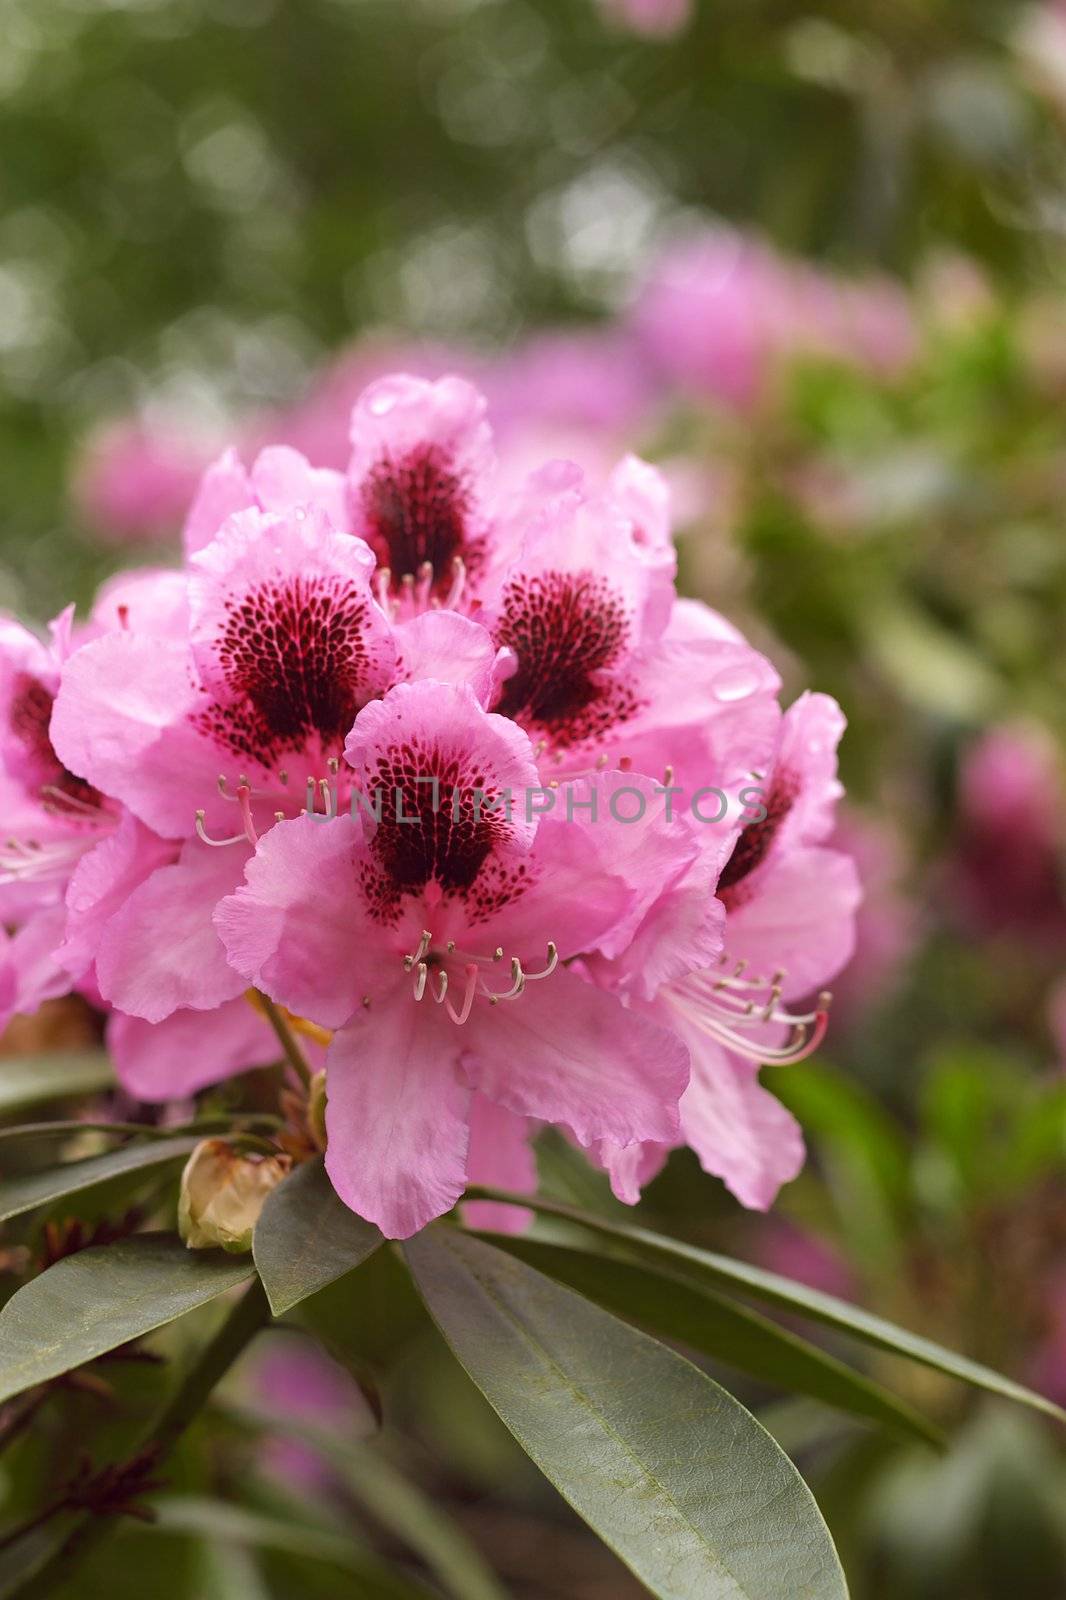 cluster of pink rhododendron blossoms with distinctive dark markings